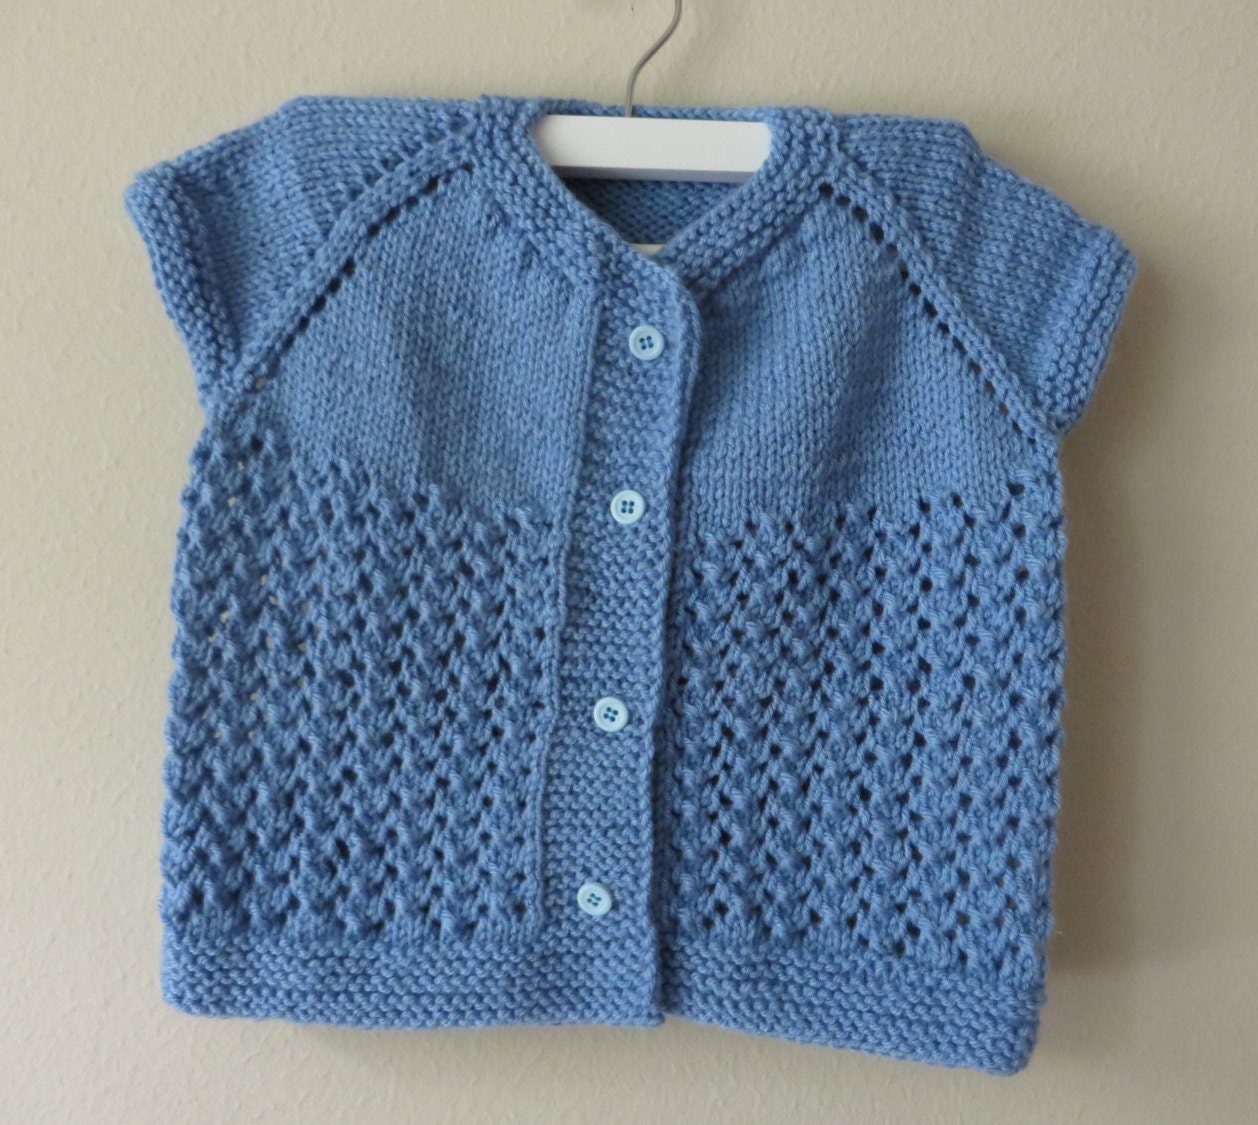 Baby Boy Blue Sweater / Hand Knitted Baby Boy Sweater 12 18